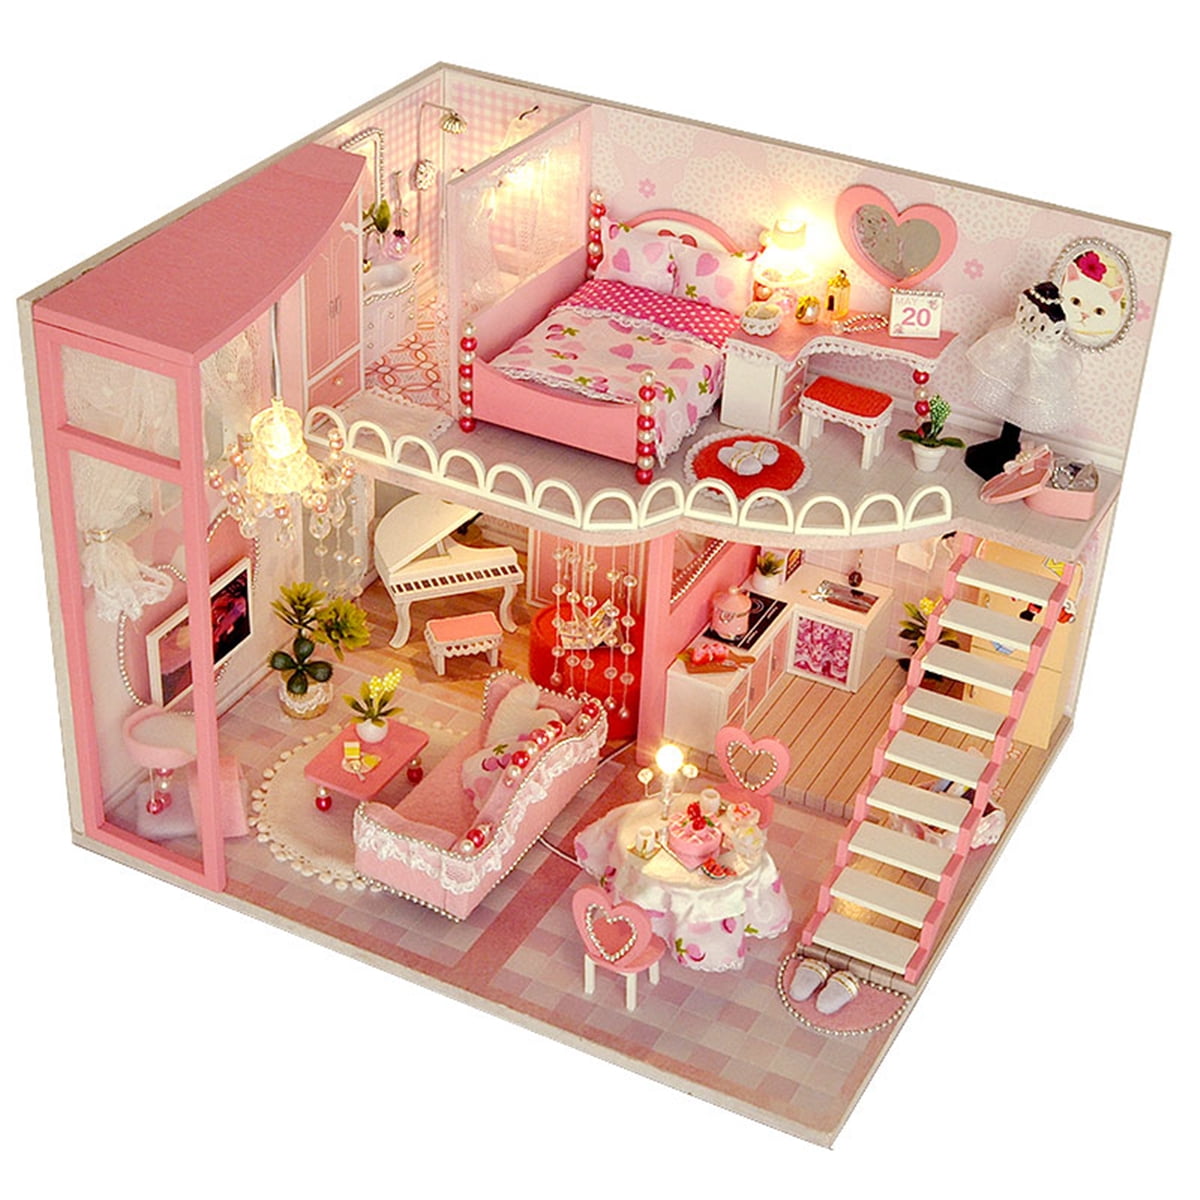 Scale 1:12 Valentine's Day Miniature Dollhouse Hello Kitty Cookies